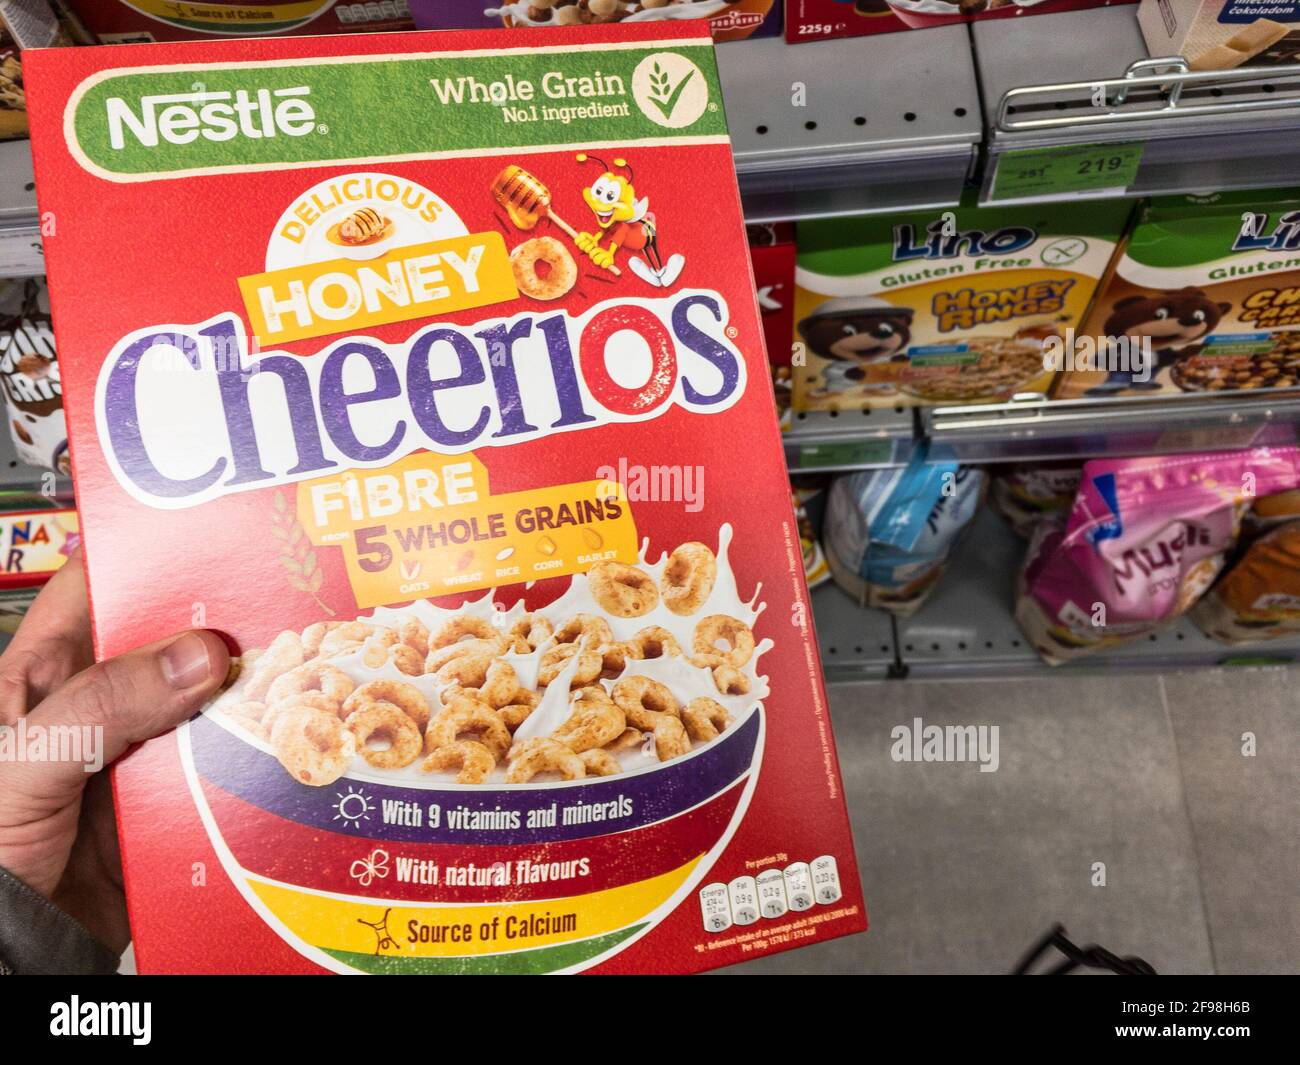 BELGRADE, SERBIA - APRIL 12, 2021: Honey Cheerios logo on boxes of Cereal for sale. Part of Nestle and General Mills, Cheerios is a brand of honey fla Stock Photo